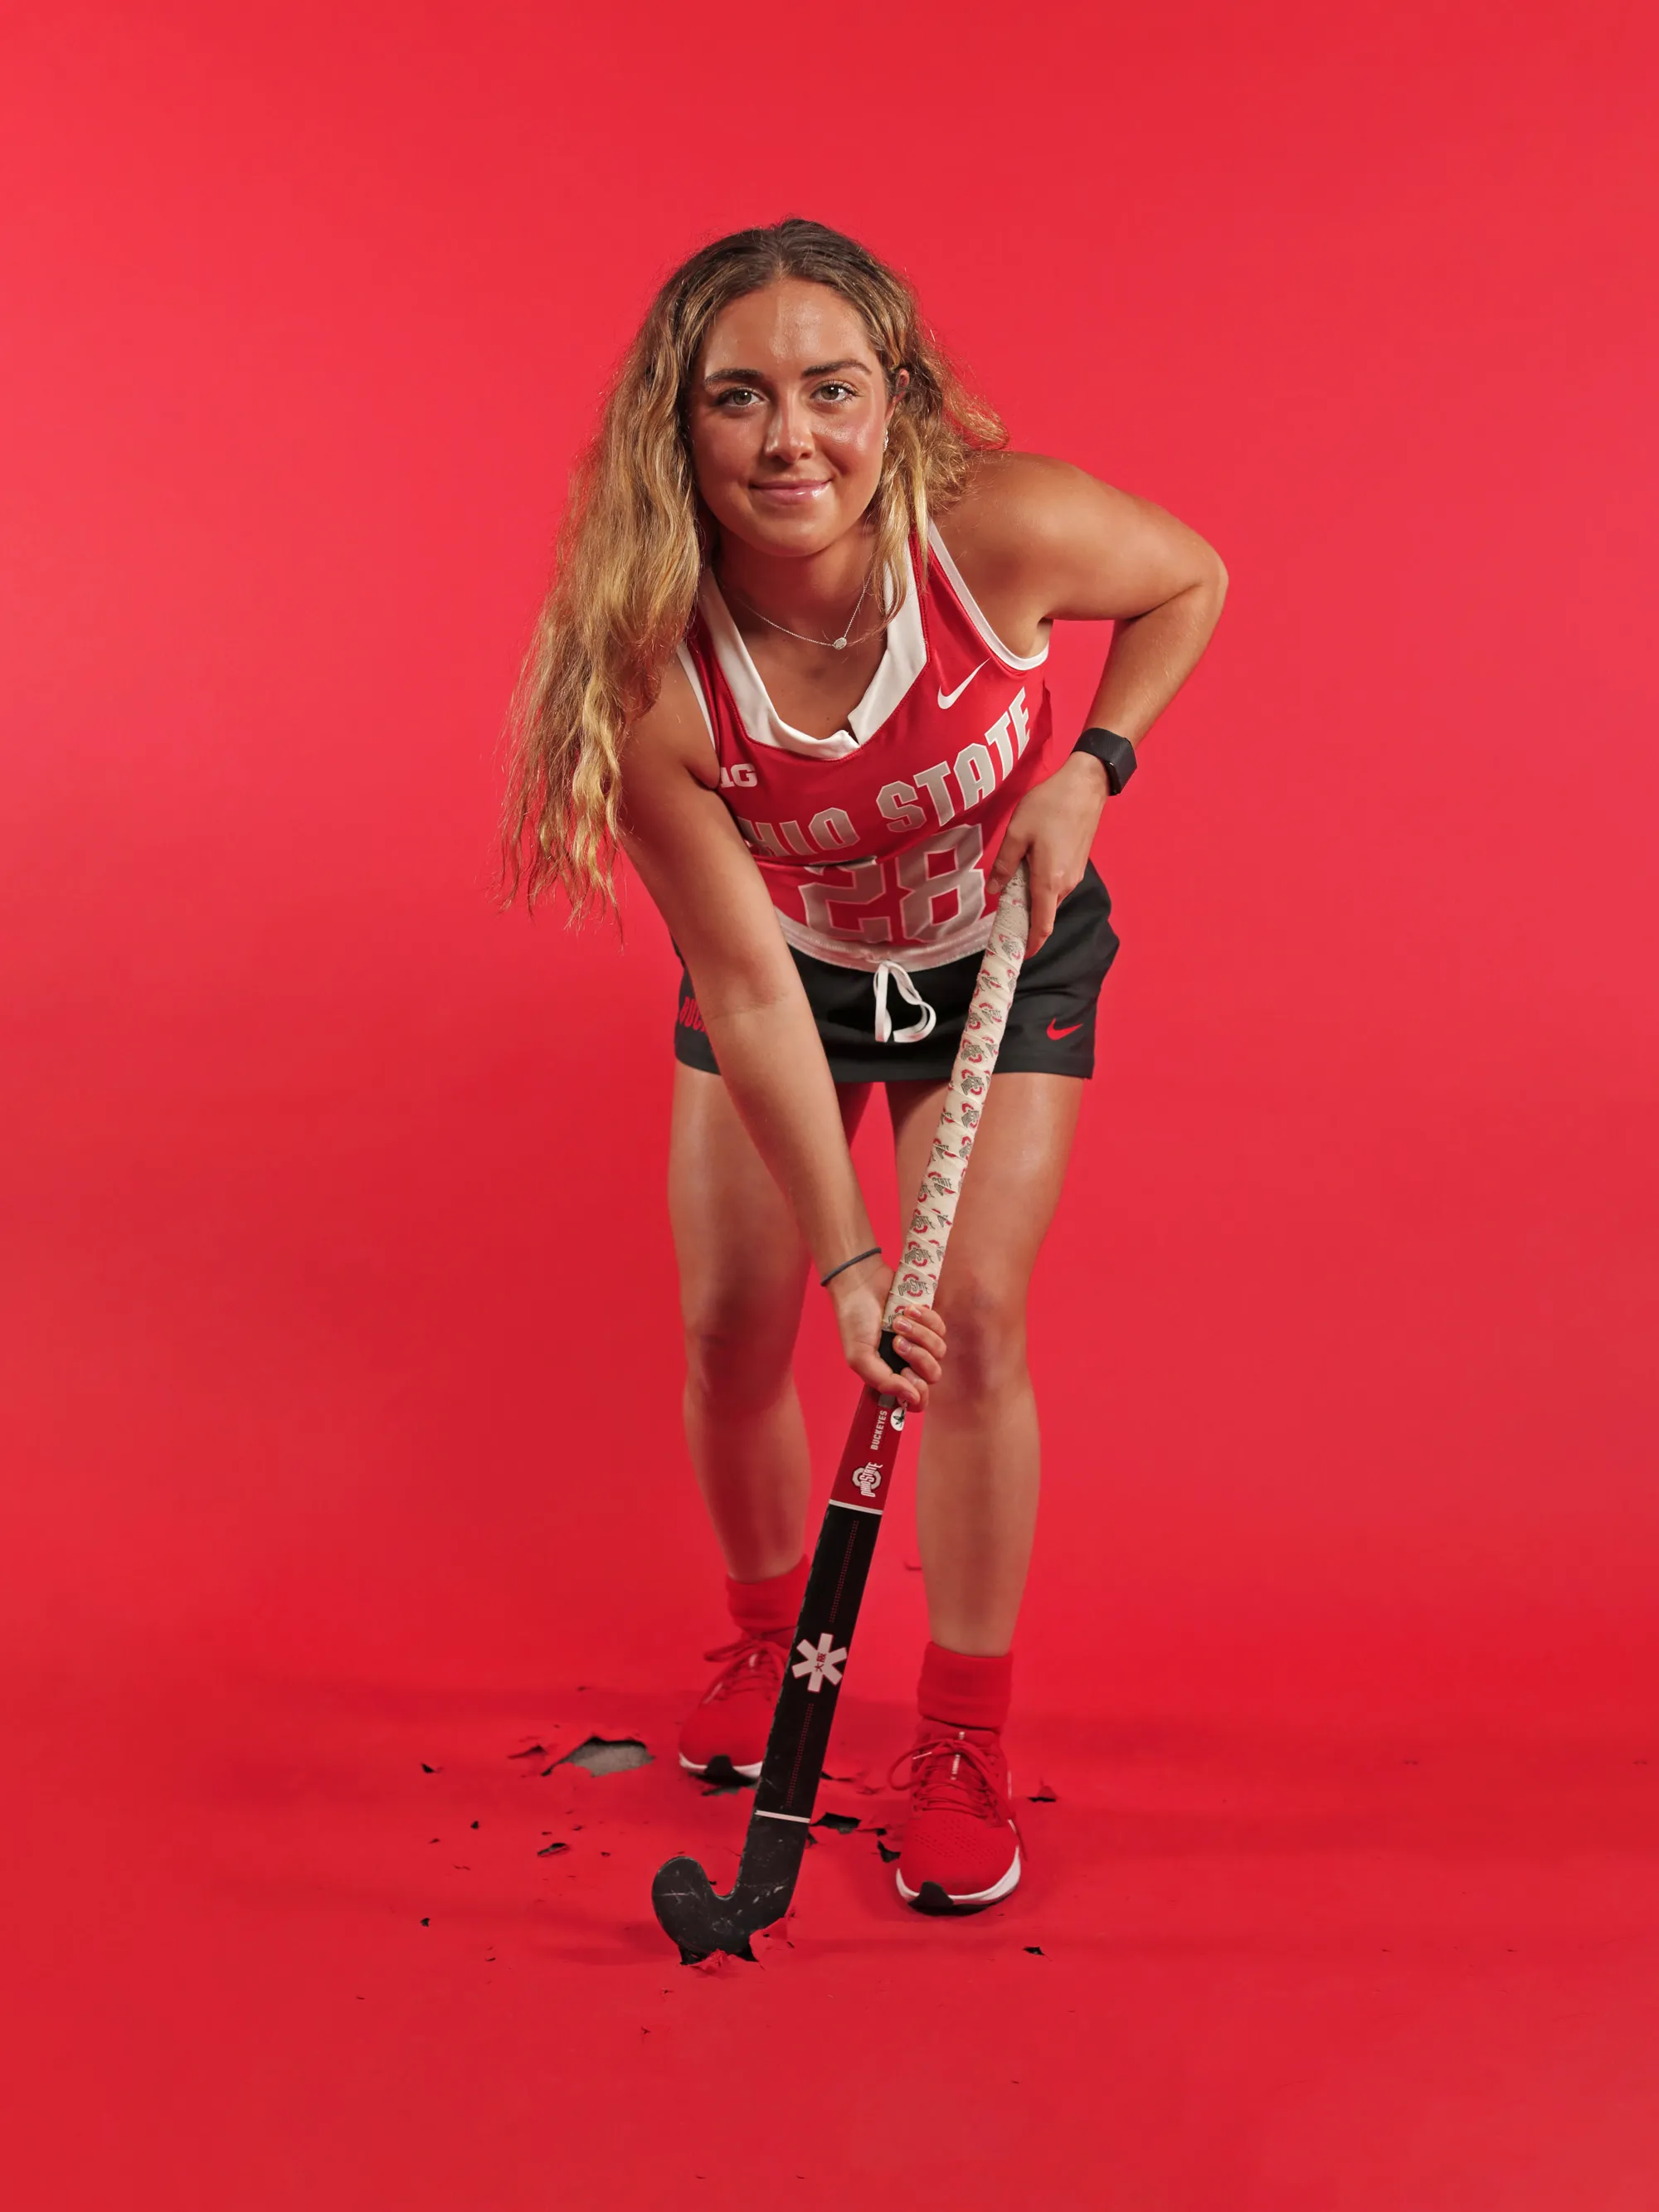 In her field hockey uniform with her stick, Makenna Webster bends forward in a play-like way, with a slight smile and her long hair hanging down. 